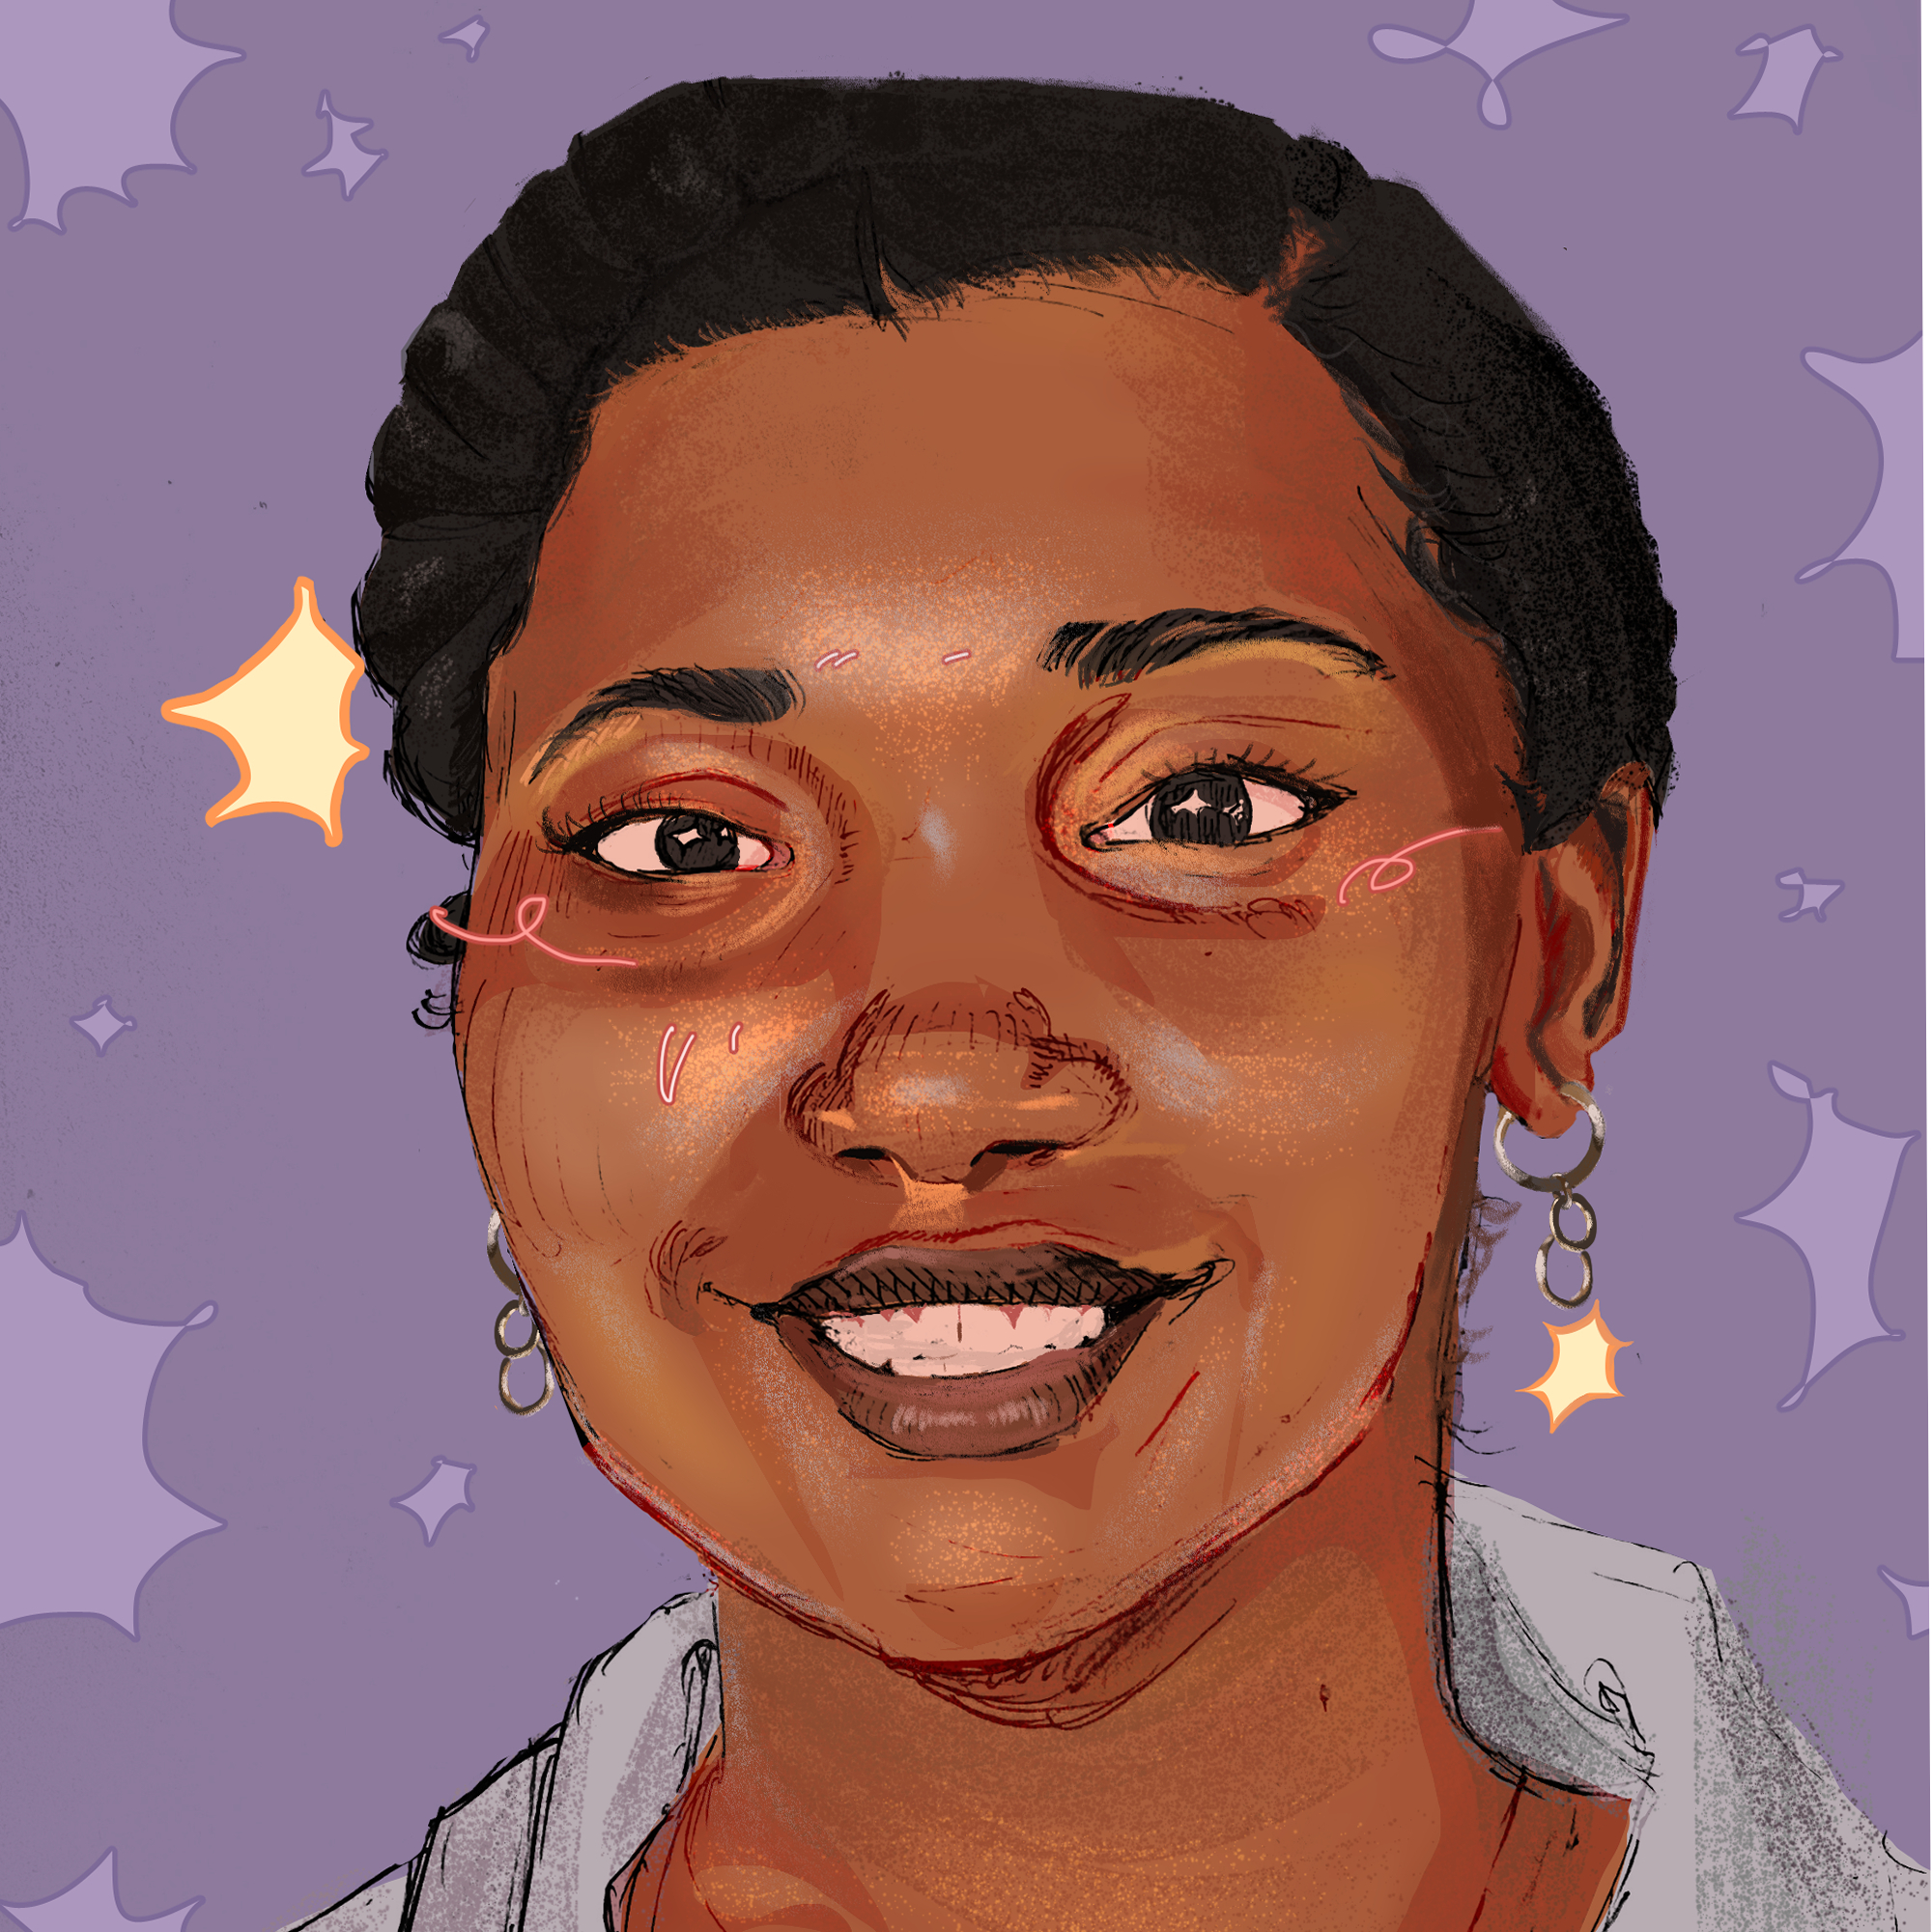 An illustrated portrait of Marissa Lacey. She is looking forward while smiling.